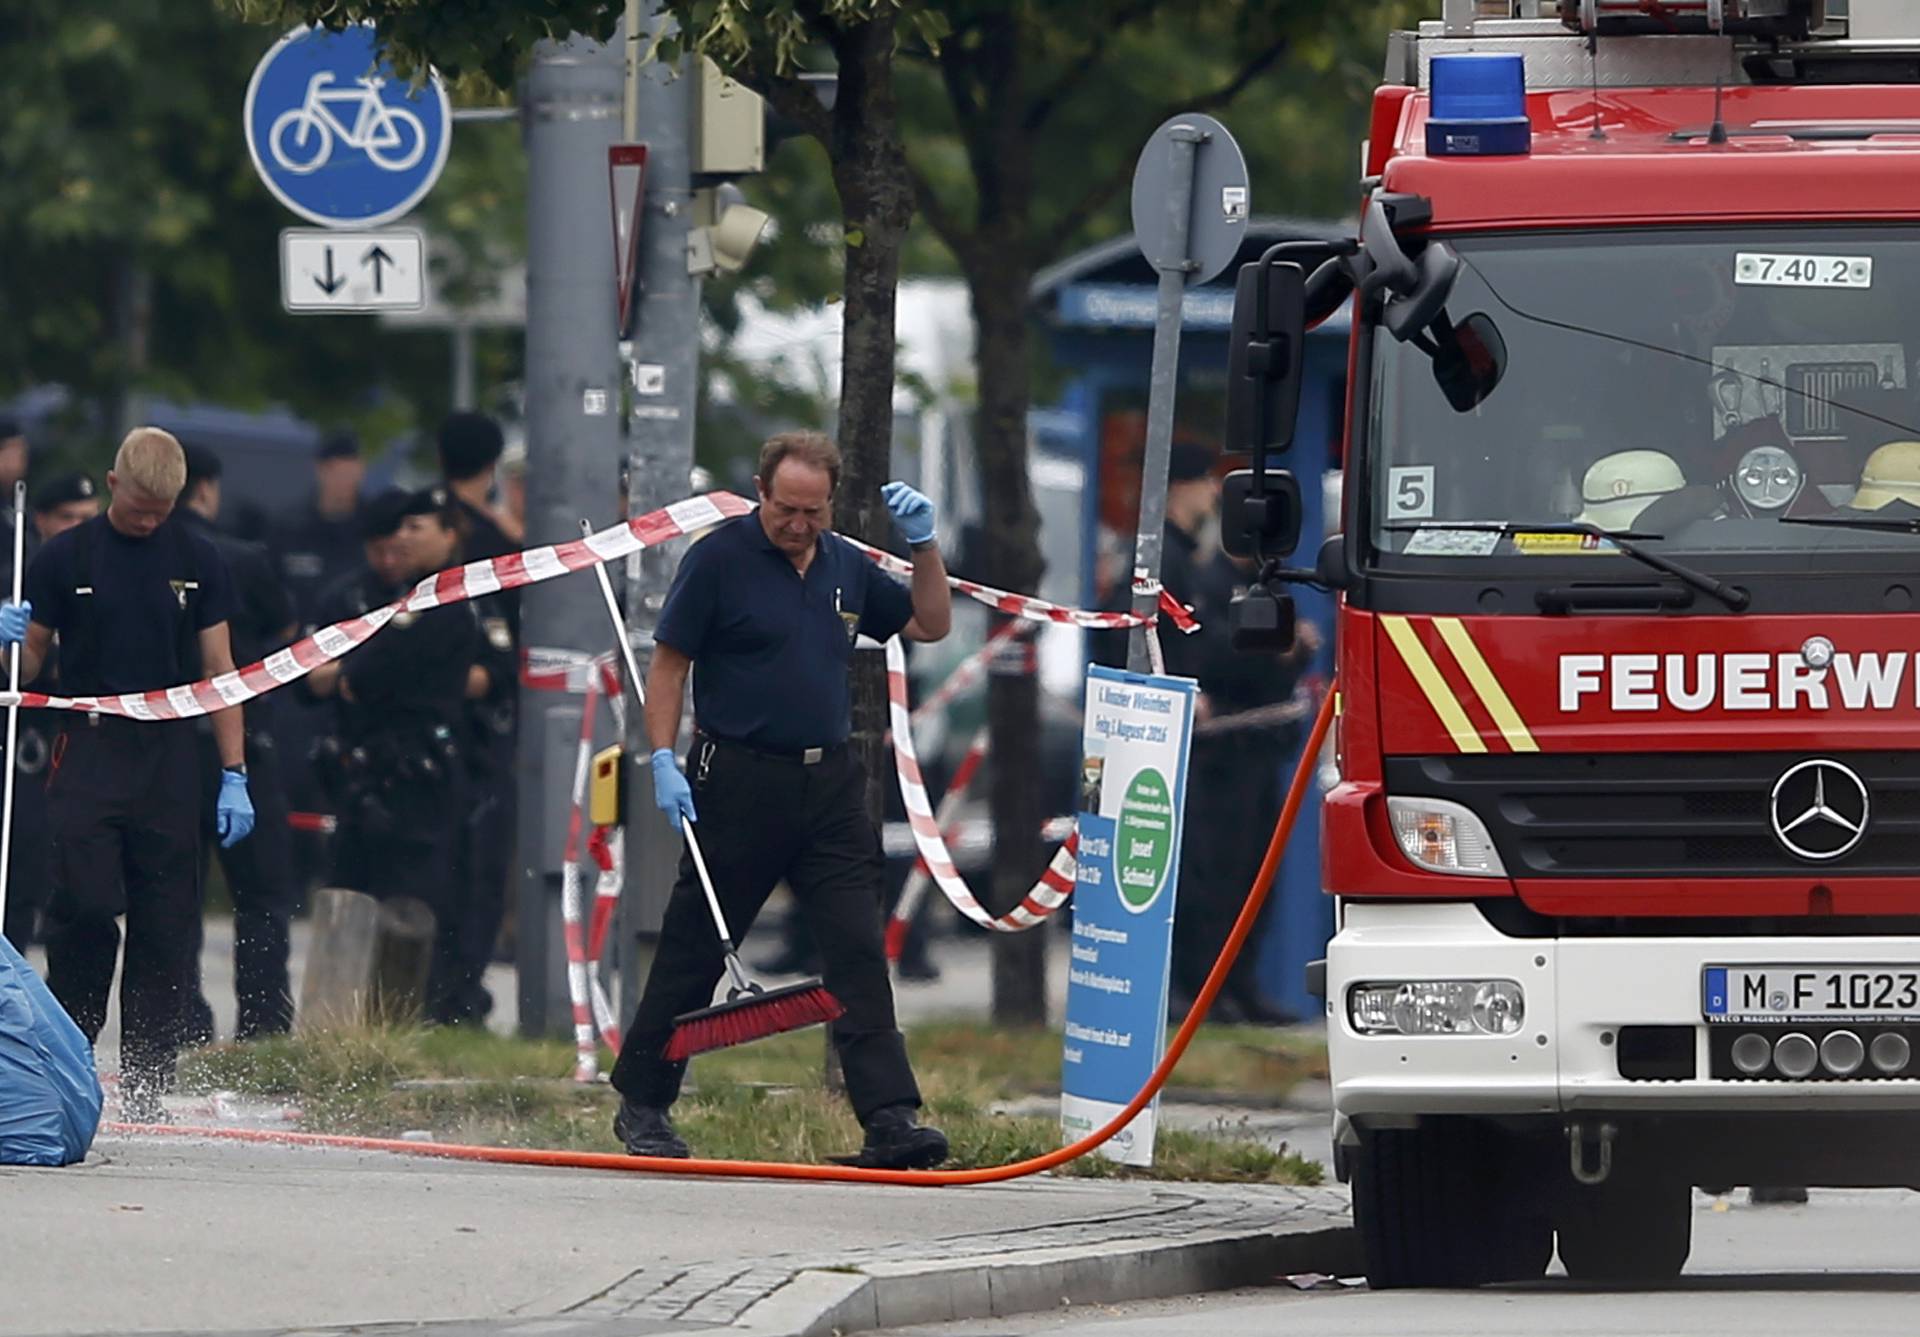 Members of the fire brigade attend scene near shooting rampage at Olympia shopping mall in Munich